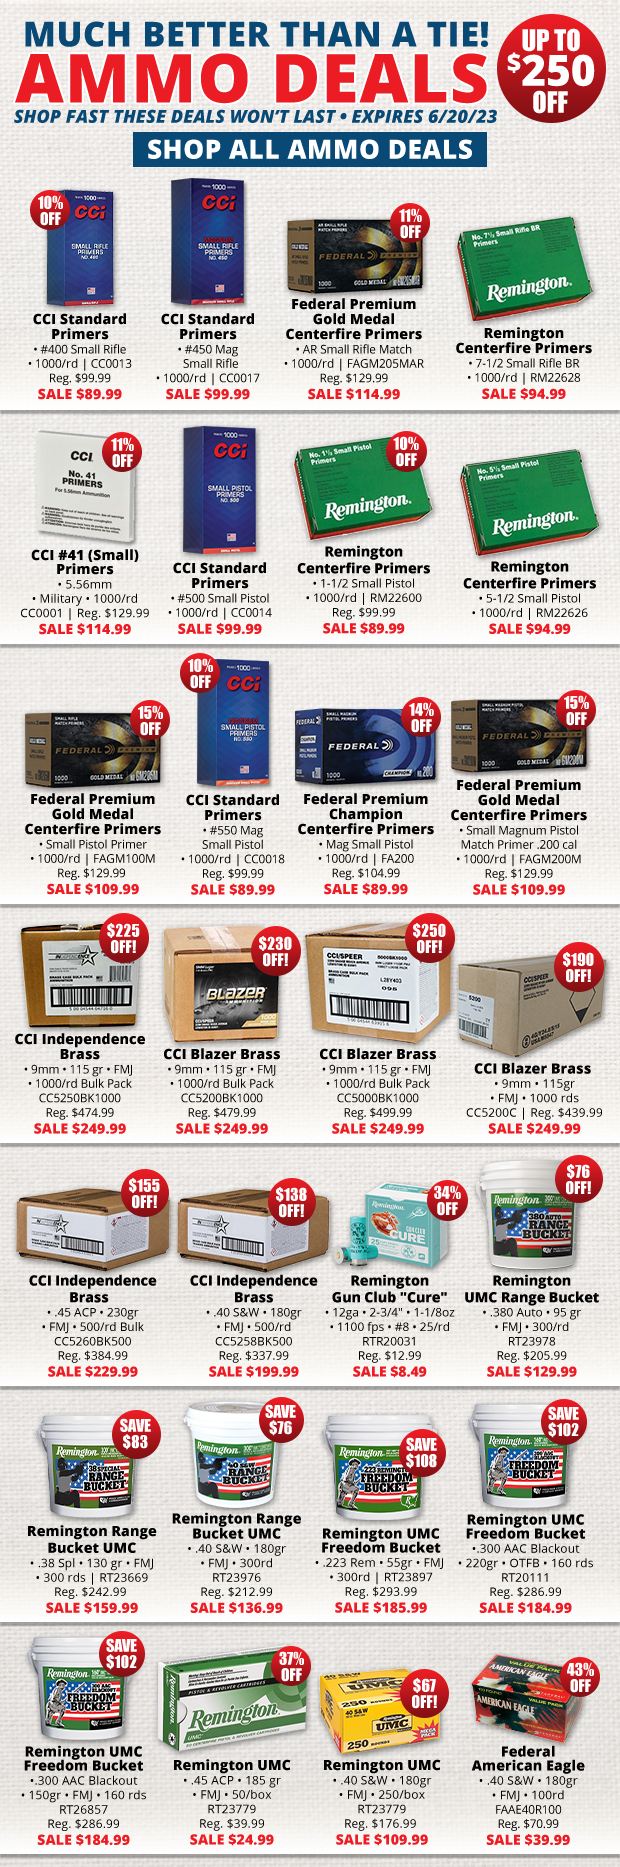 Ammo Deals up to $250 Off